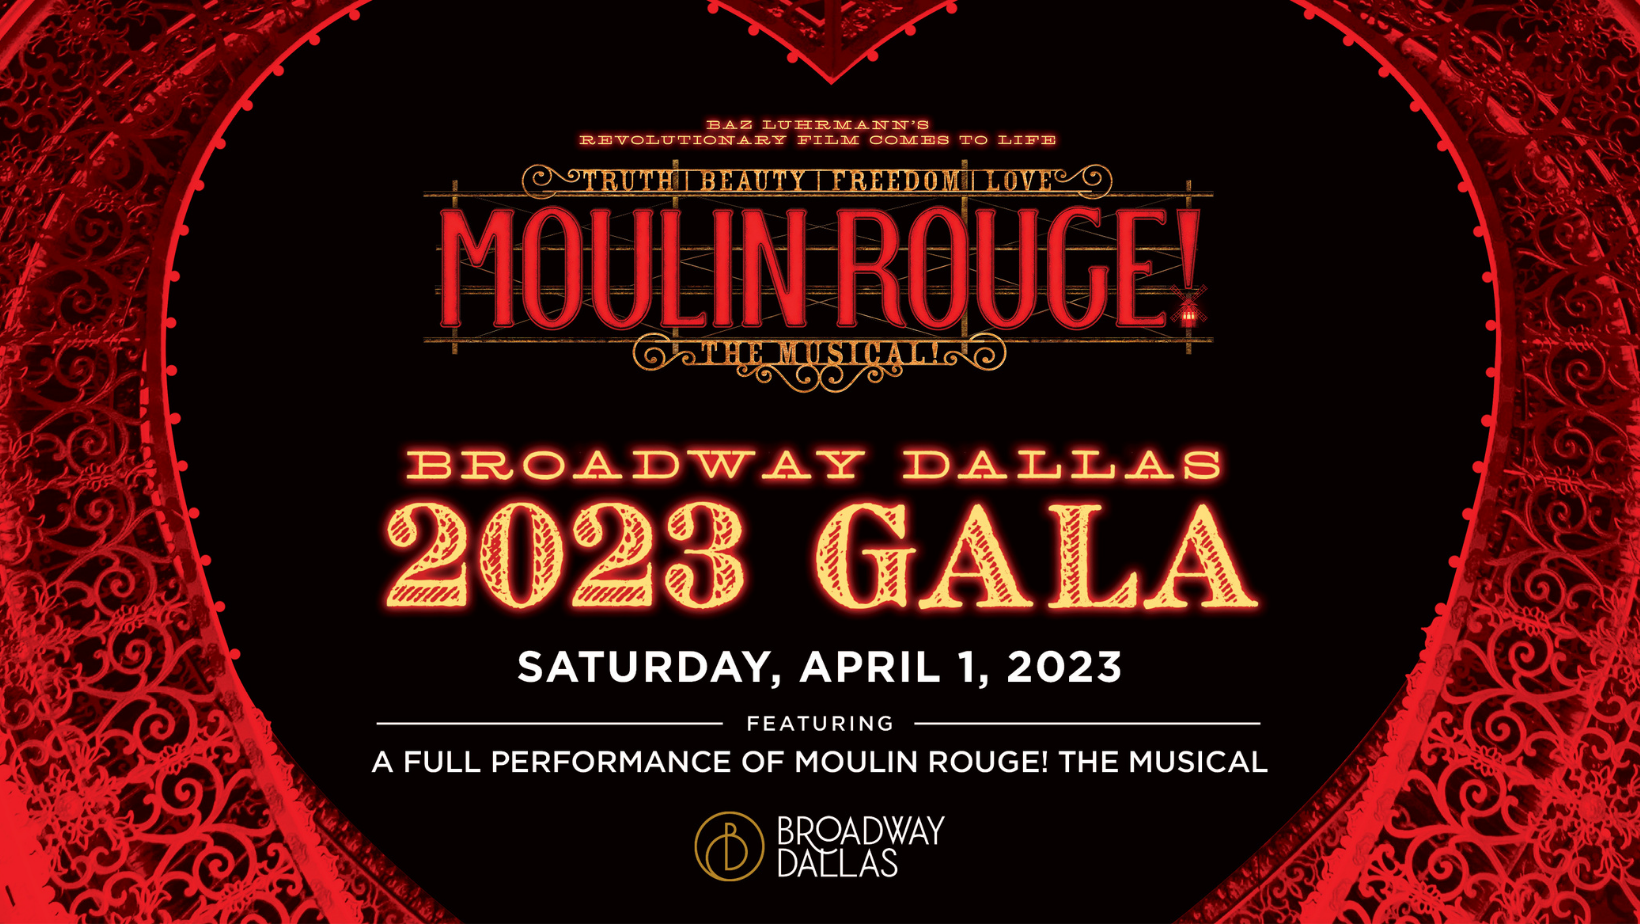  Broadway Dallas 2023 Gala: Saturday, April 1, 2023, featuring a full performance of Moulin Rouge! The Musical. (Baz Luhrmann's revolutionary film comes to life. Truth, Beauty, Freedom, Love.)